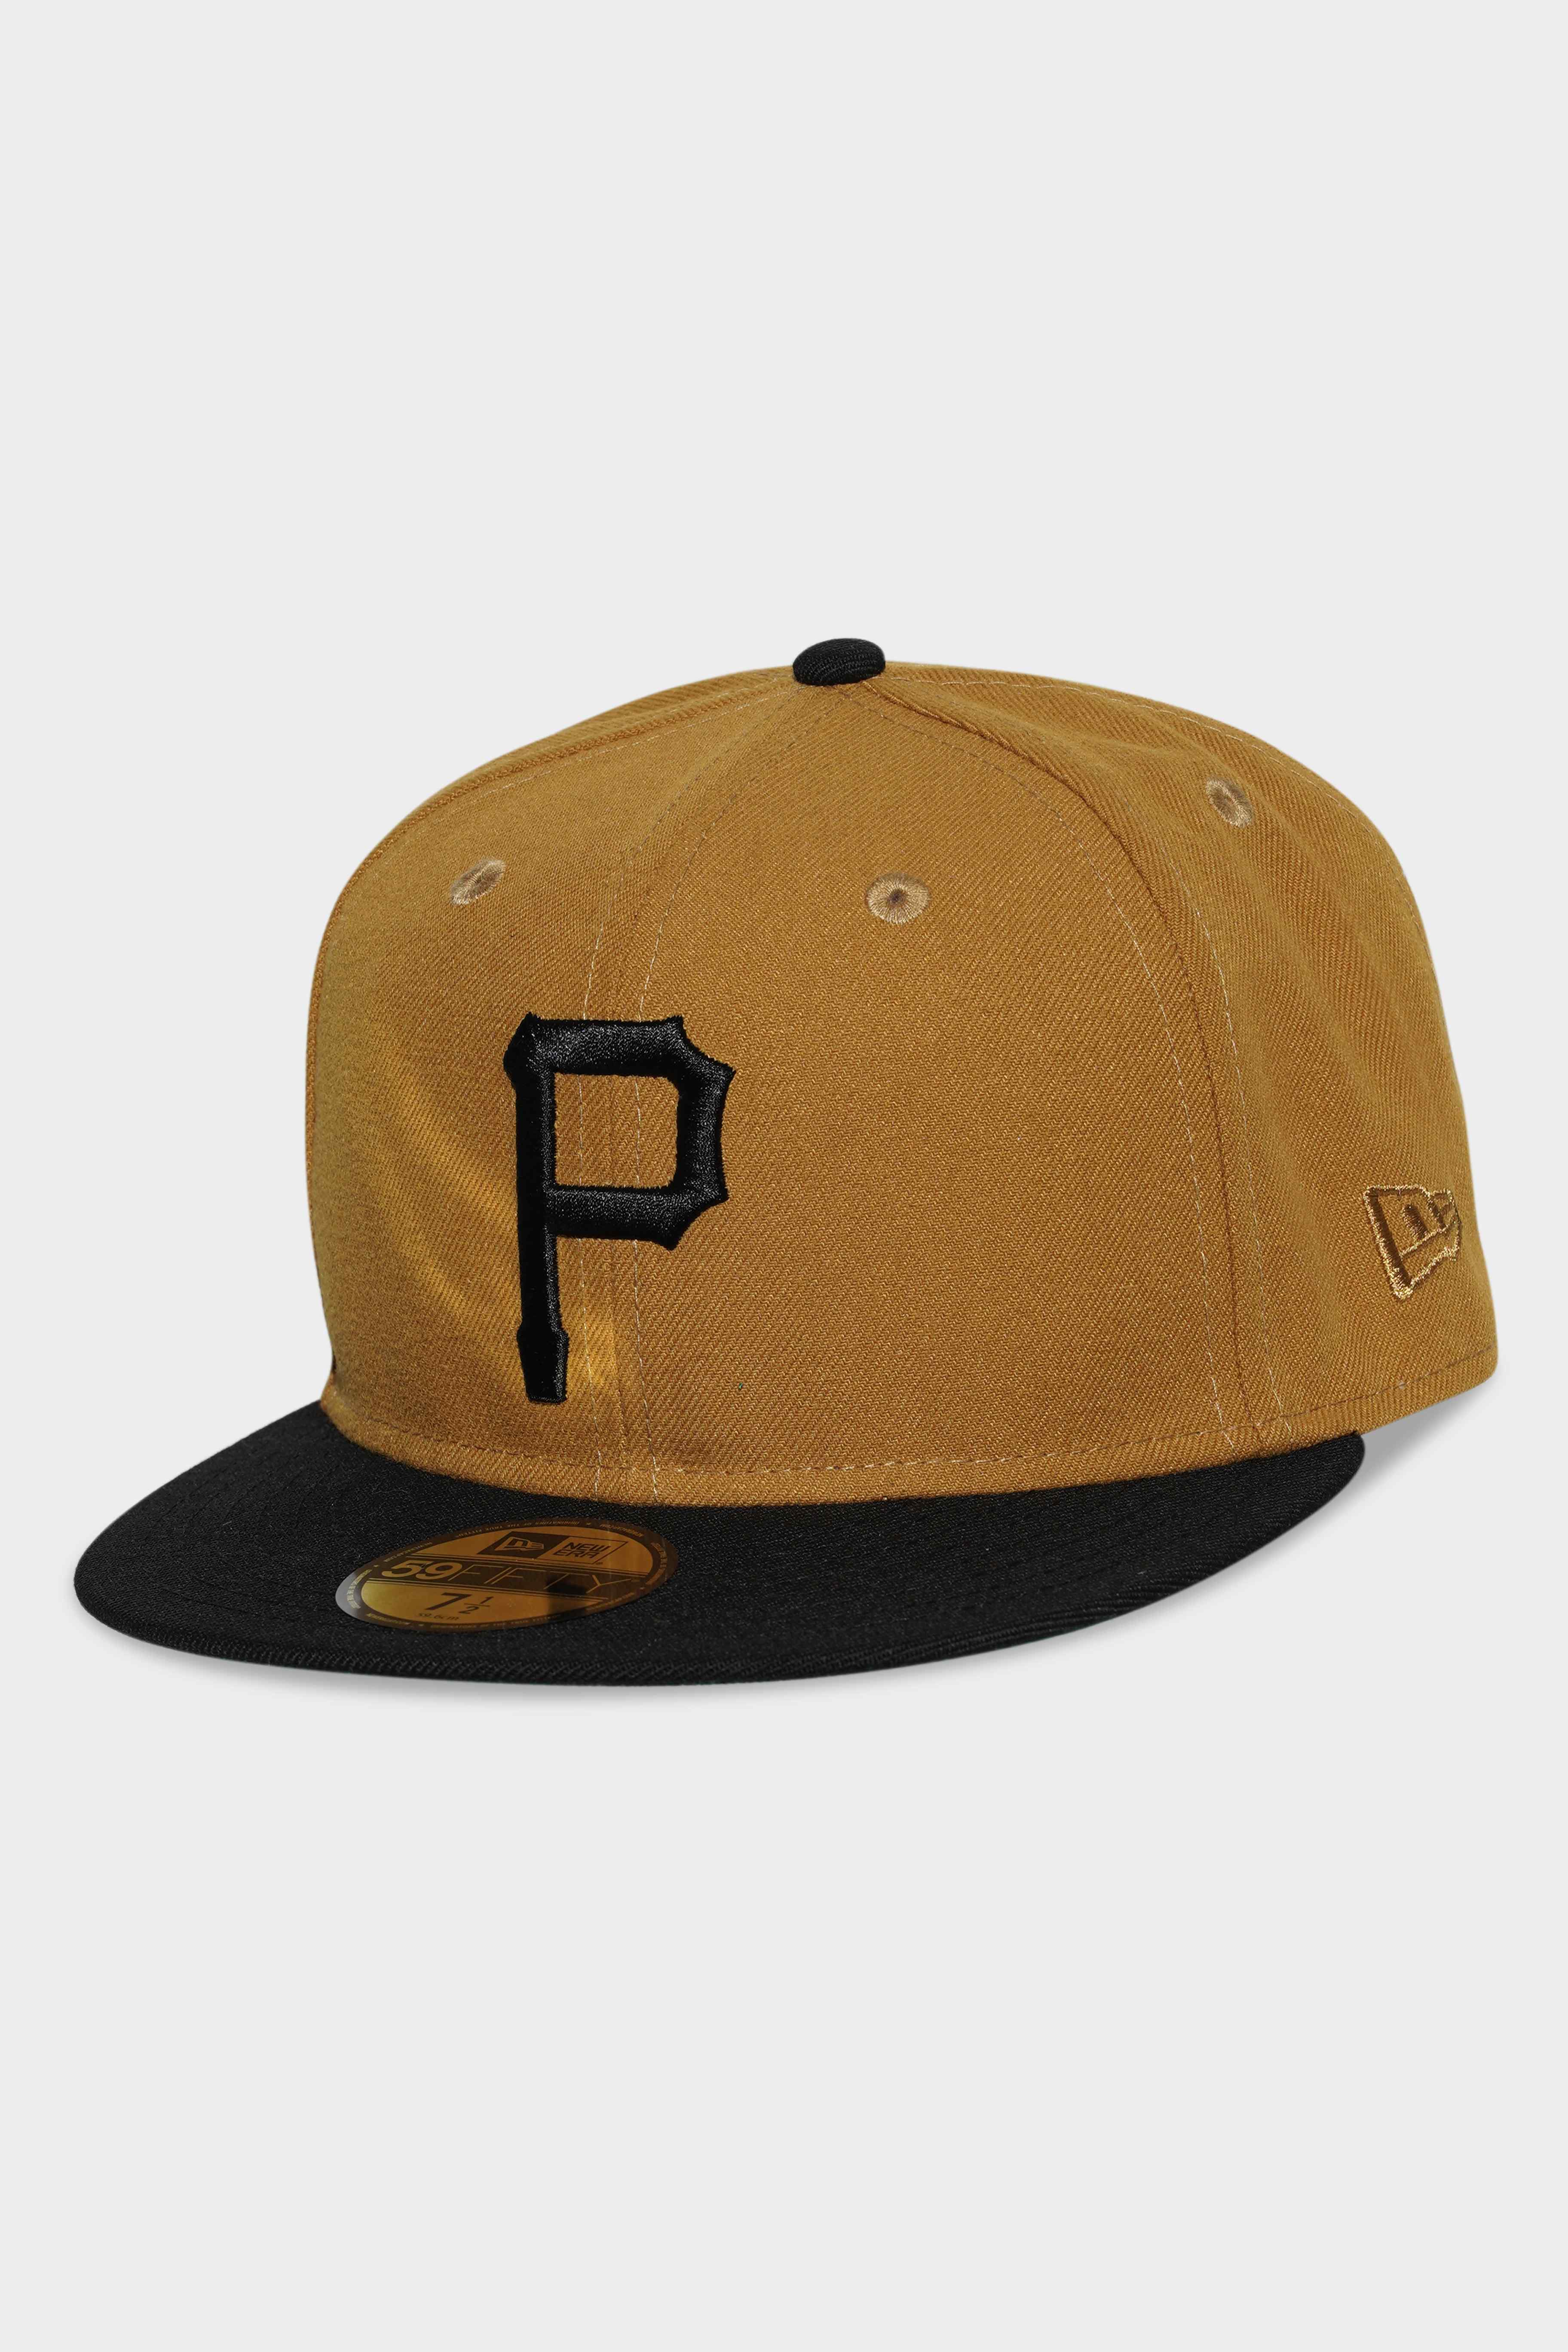 New Era 5950 Pittsburgh Pirates Archive Cooperstown OTC Gold Fitted